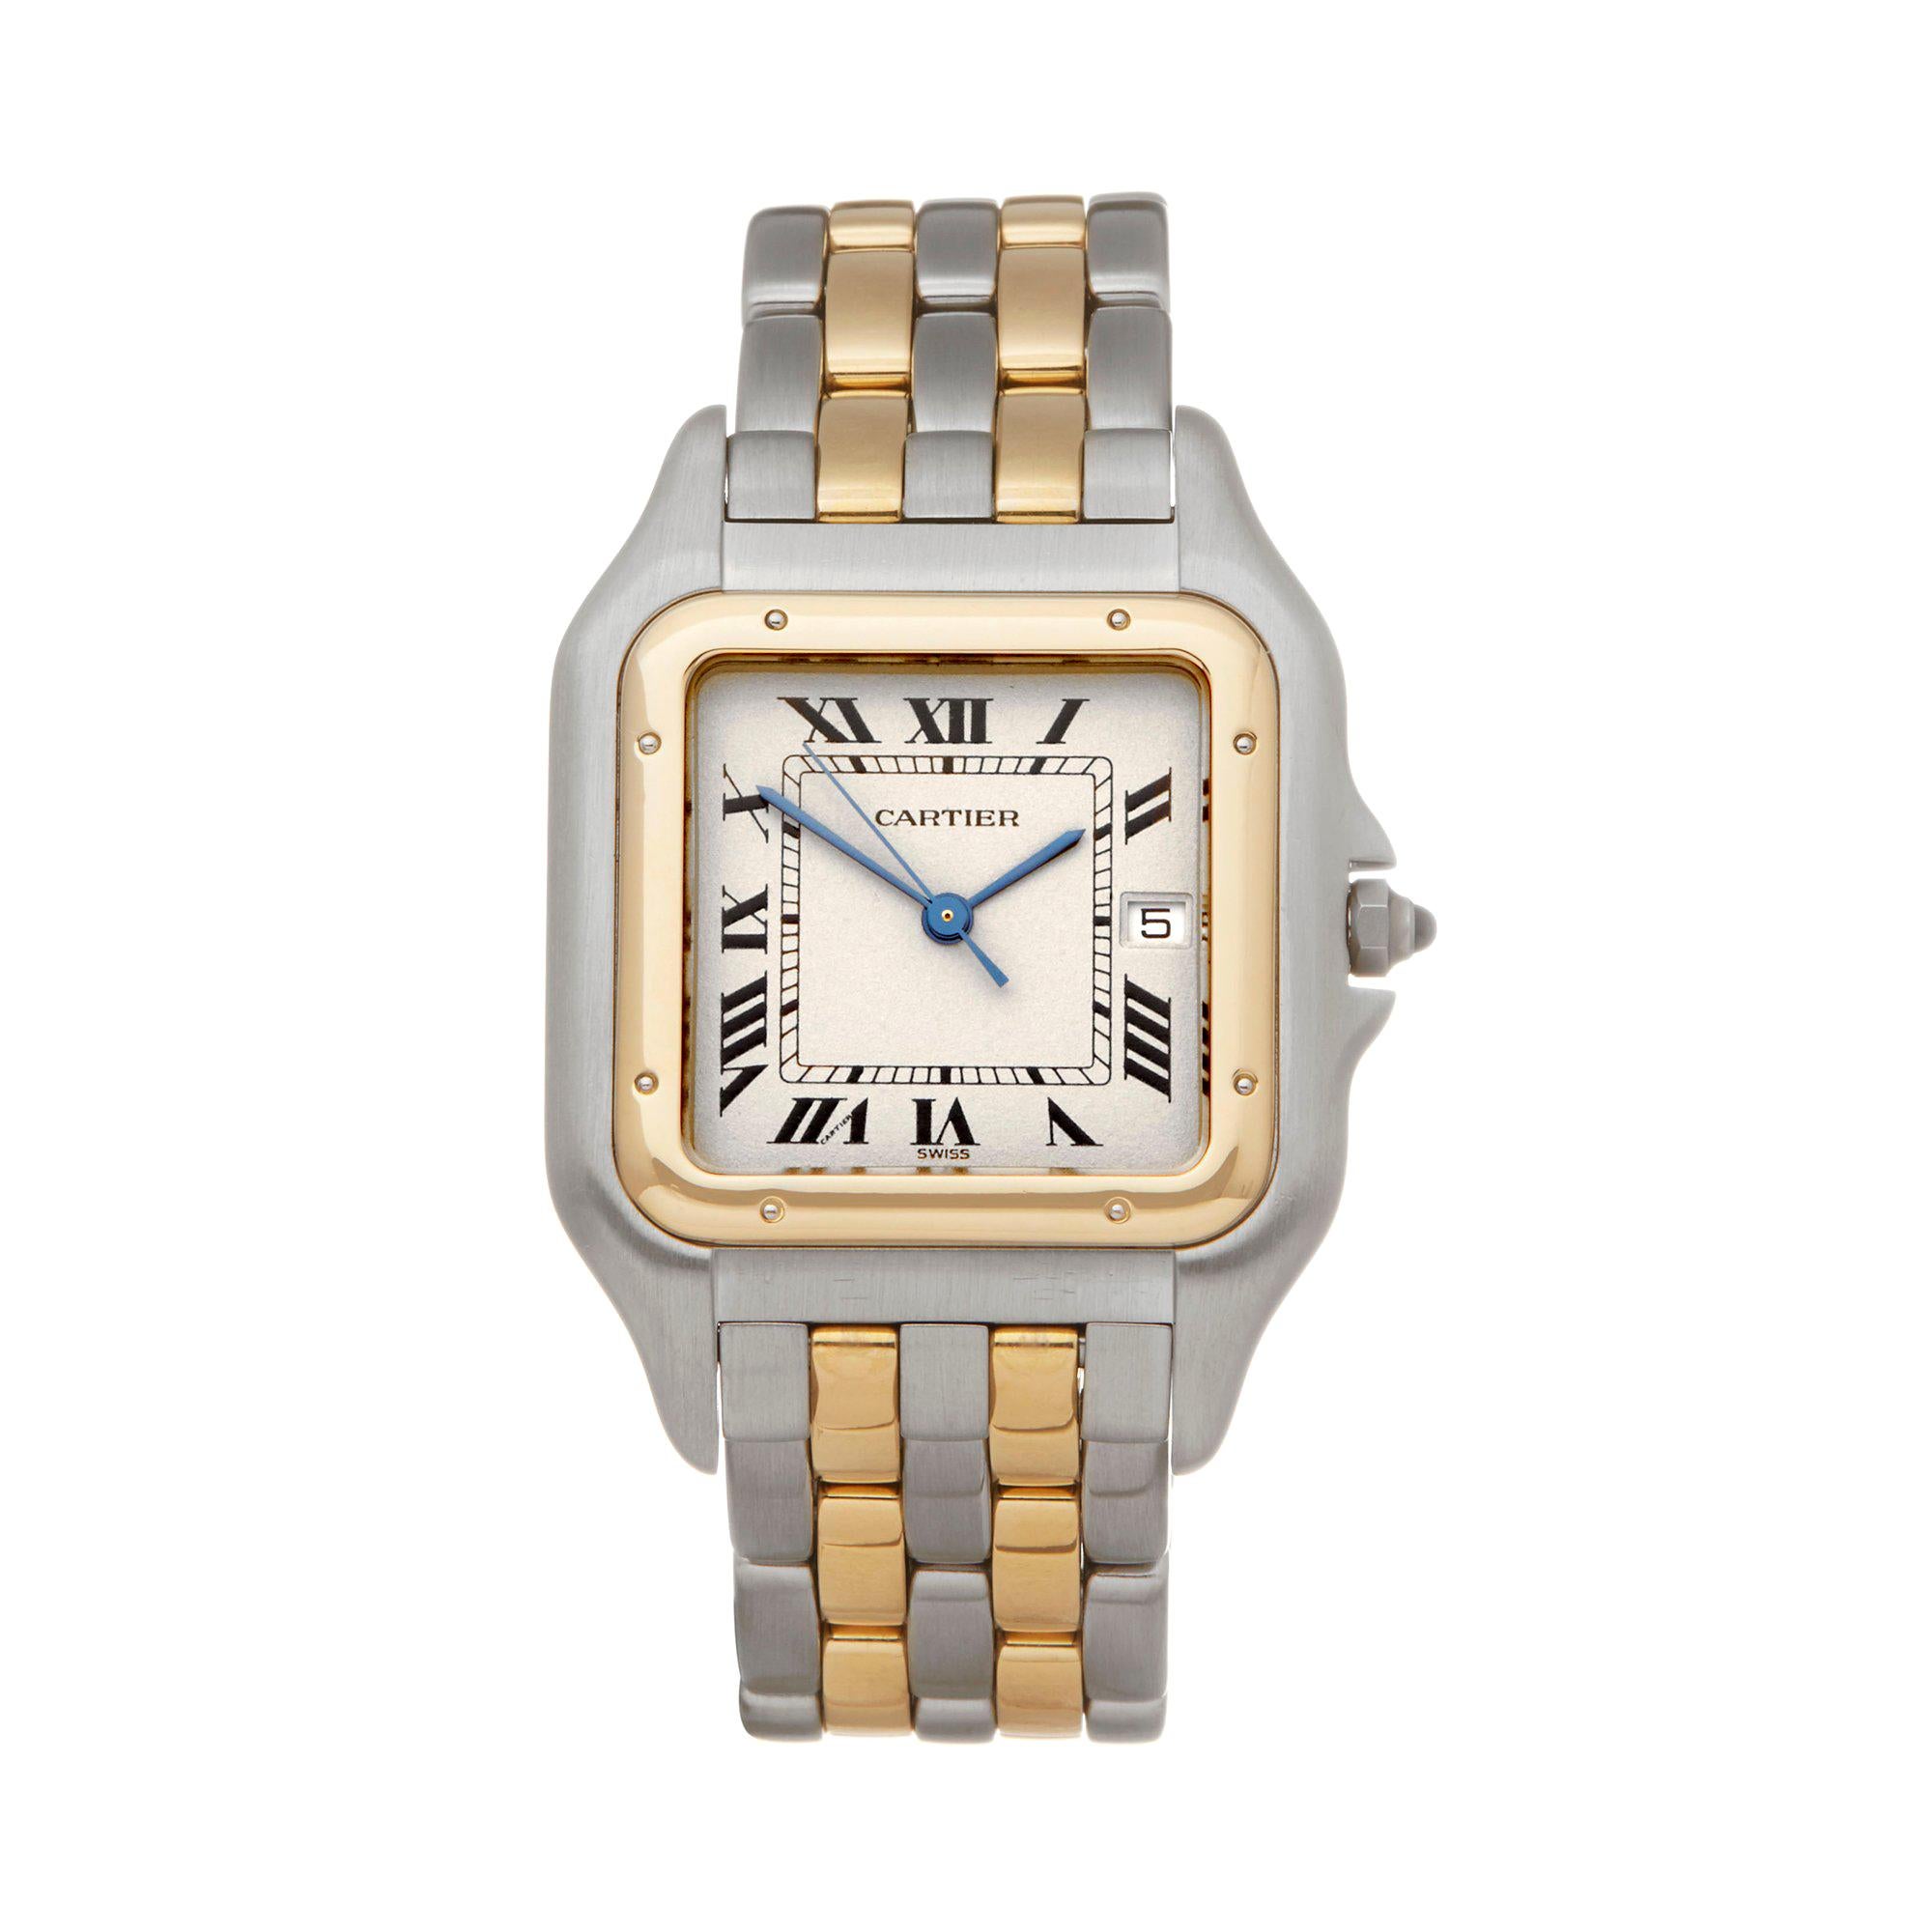 Cartier Panthere Two-Row Stainless and Yellow Gold 187957 or 0194 Wristwatch